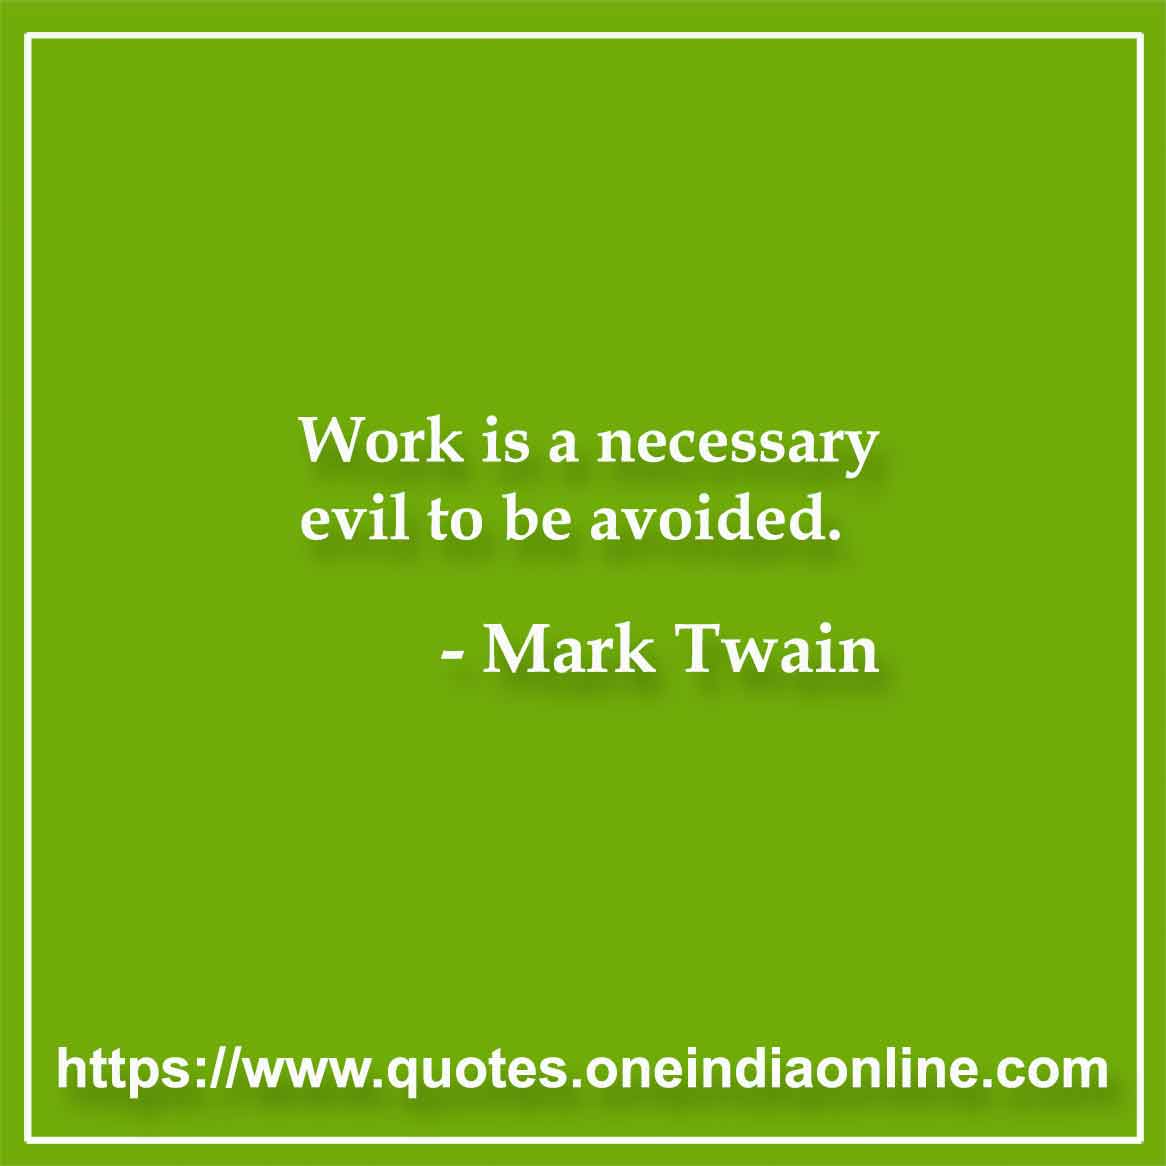 Work is a necessary evil to be avoided.